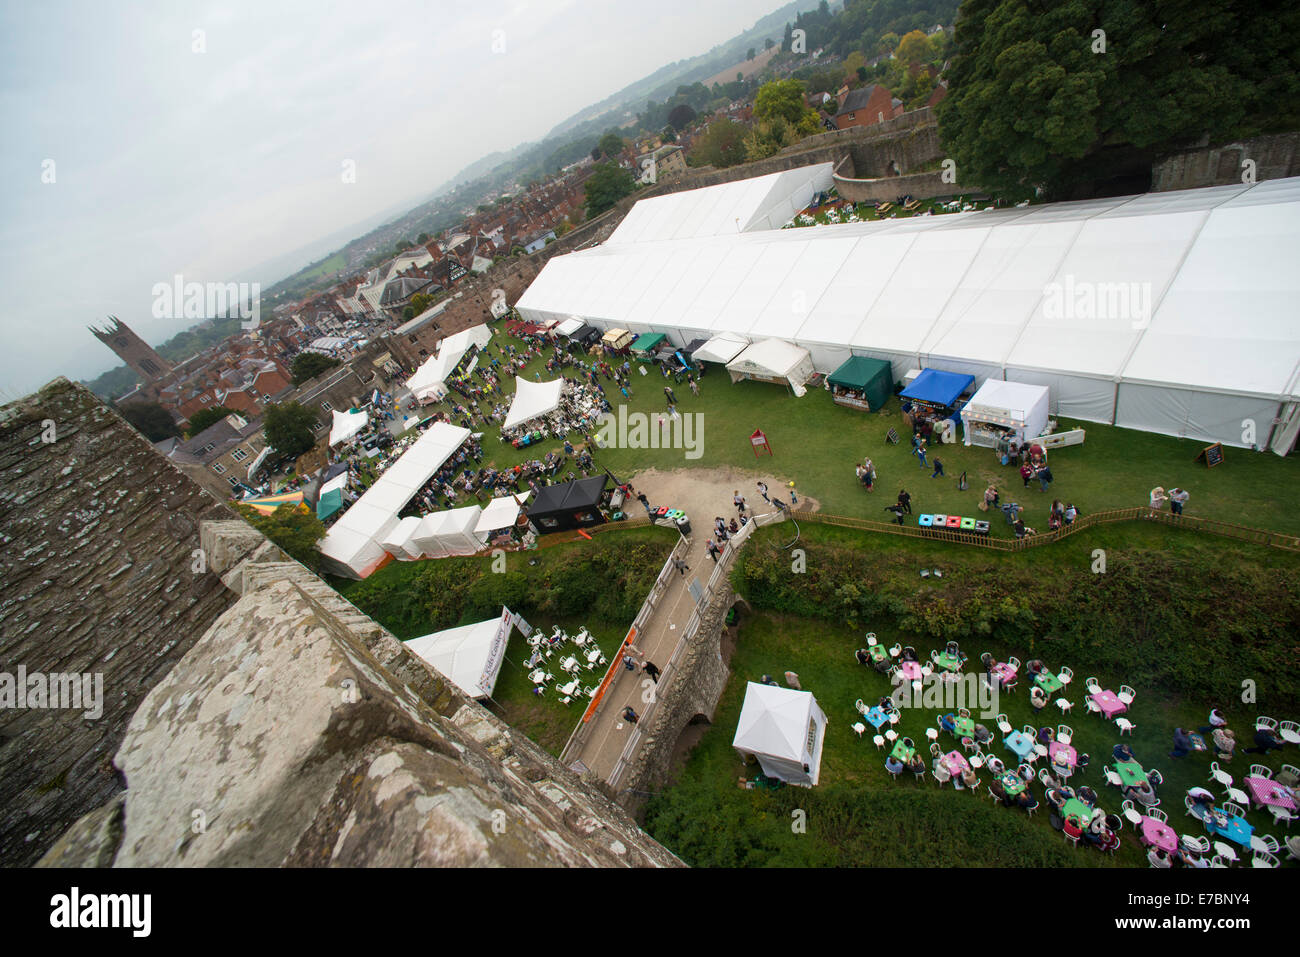 Ludlow, Shropshire, UK. 12th September, 2014. The 2014 Ludlow Food Festival held in the castle grounds, Shropshire, England, Friday 12th September. Stock Photo